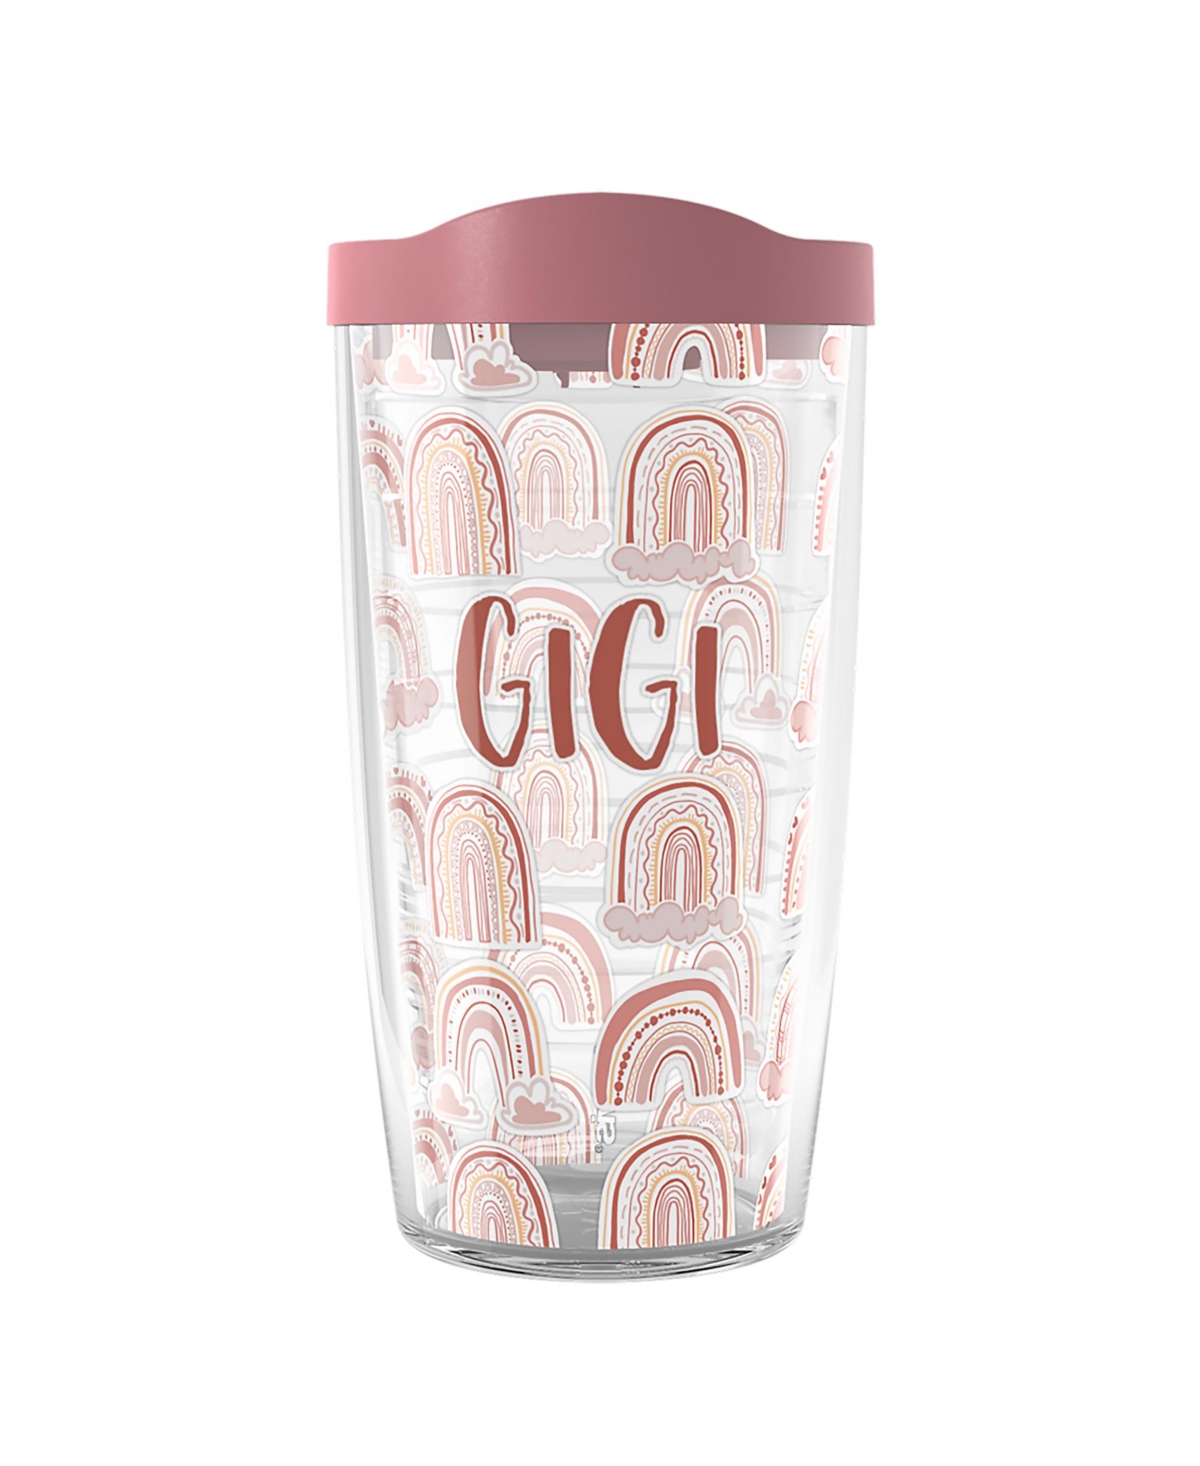 Tervis Tumbler Tervis Boho Rainbow Gigi Made In Usa Double Walled Insulated Tumbler Travel Cup Keeps Drinks Cold & In Open Miscellaneous